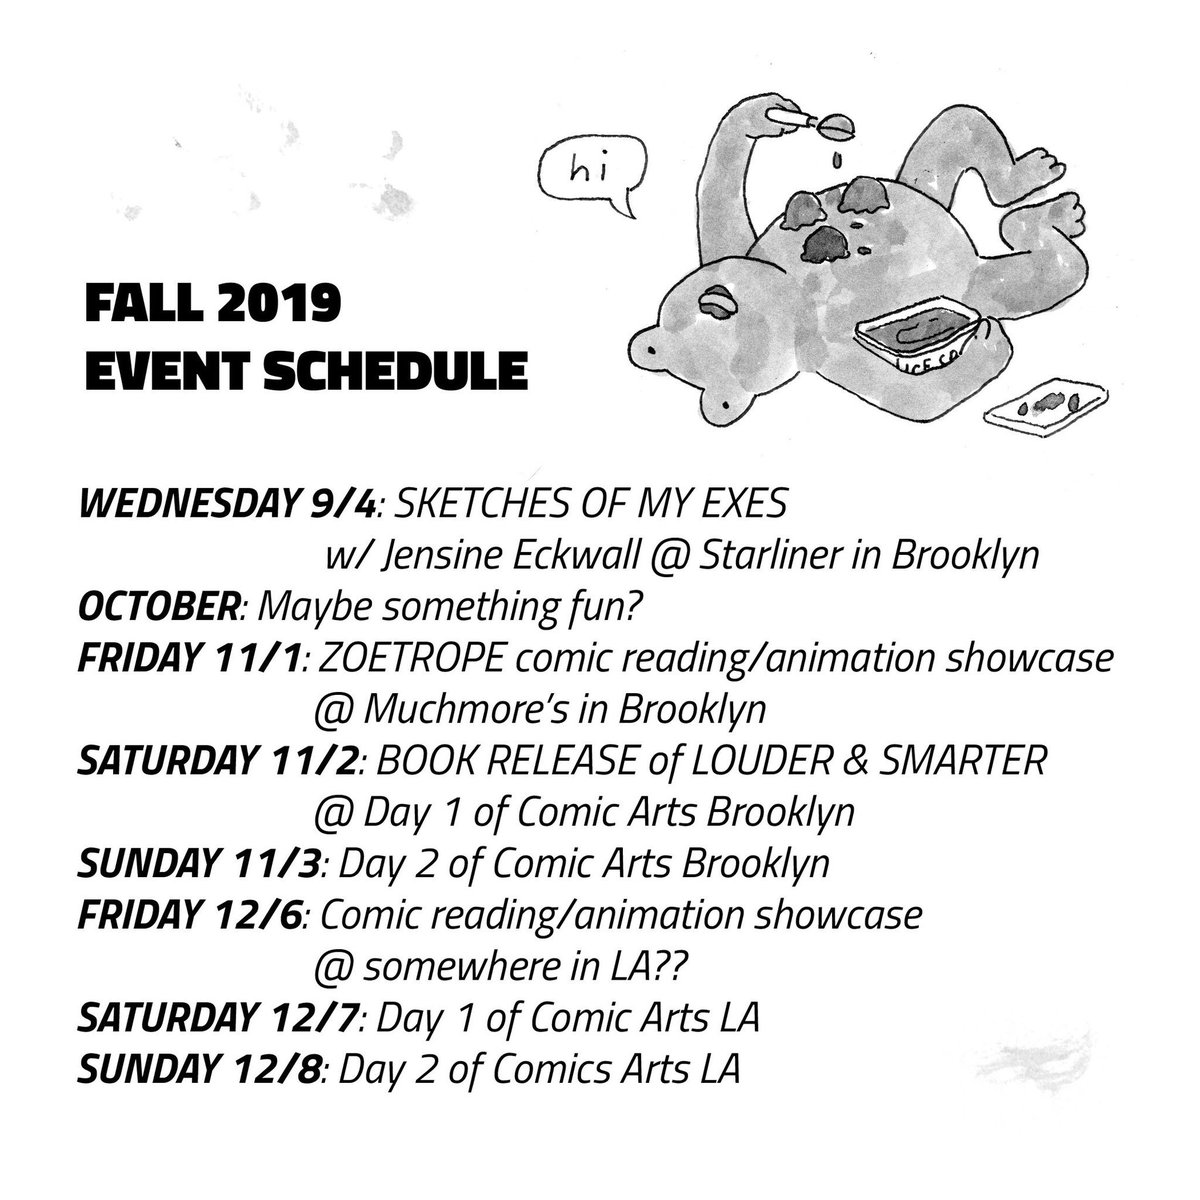 i'm putting my second book out with @pyritepress! it'll be available saturday 11/2
here's the cover and an event schedule for the rest of the year
every event is free! come on out <33 